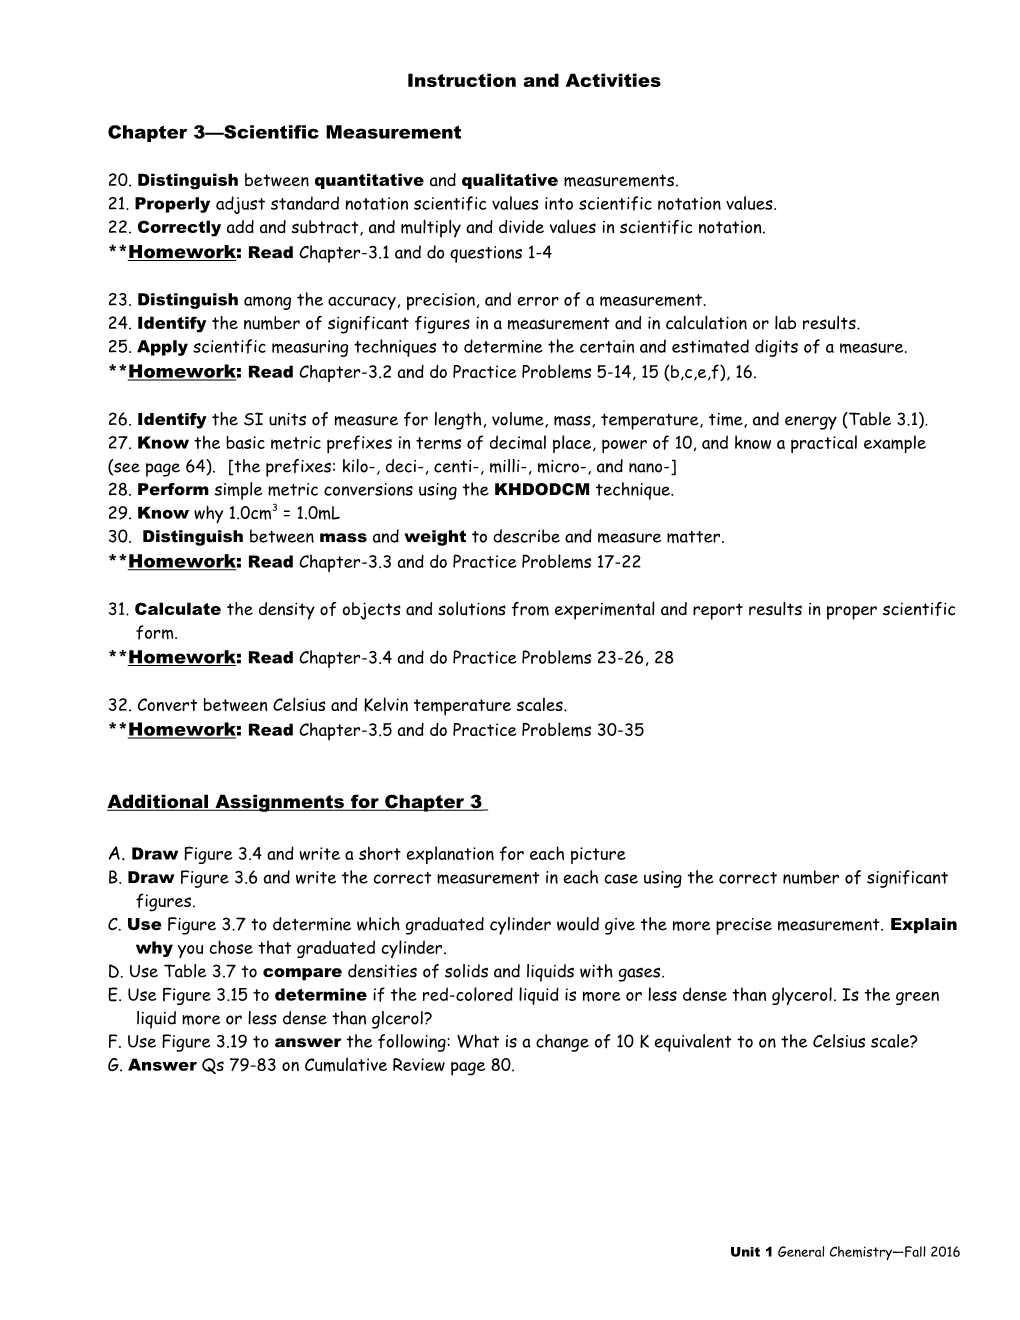 Unit 1 Student Learning Objectives for General Chemistry